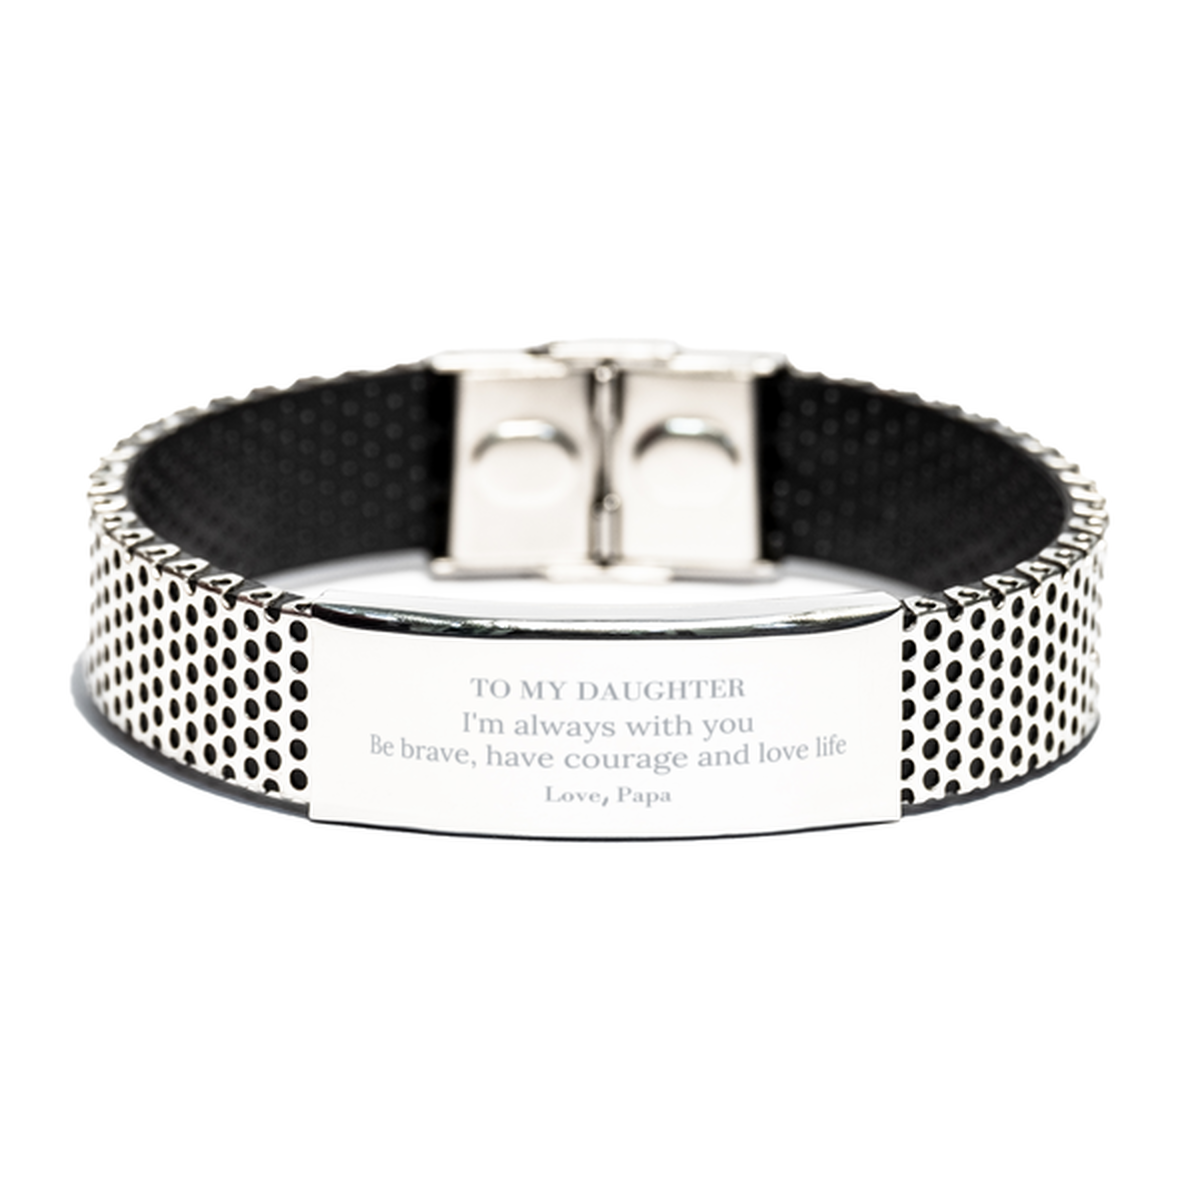 To My Daughter Gifts from Papa, Unique Stainless Steel Bracelet Inspirational Christmas Birthday Graduation Gifts for Daughter I'm always with you. Be brave, have courage and love life. Love, Papa